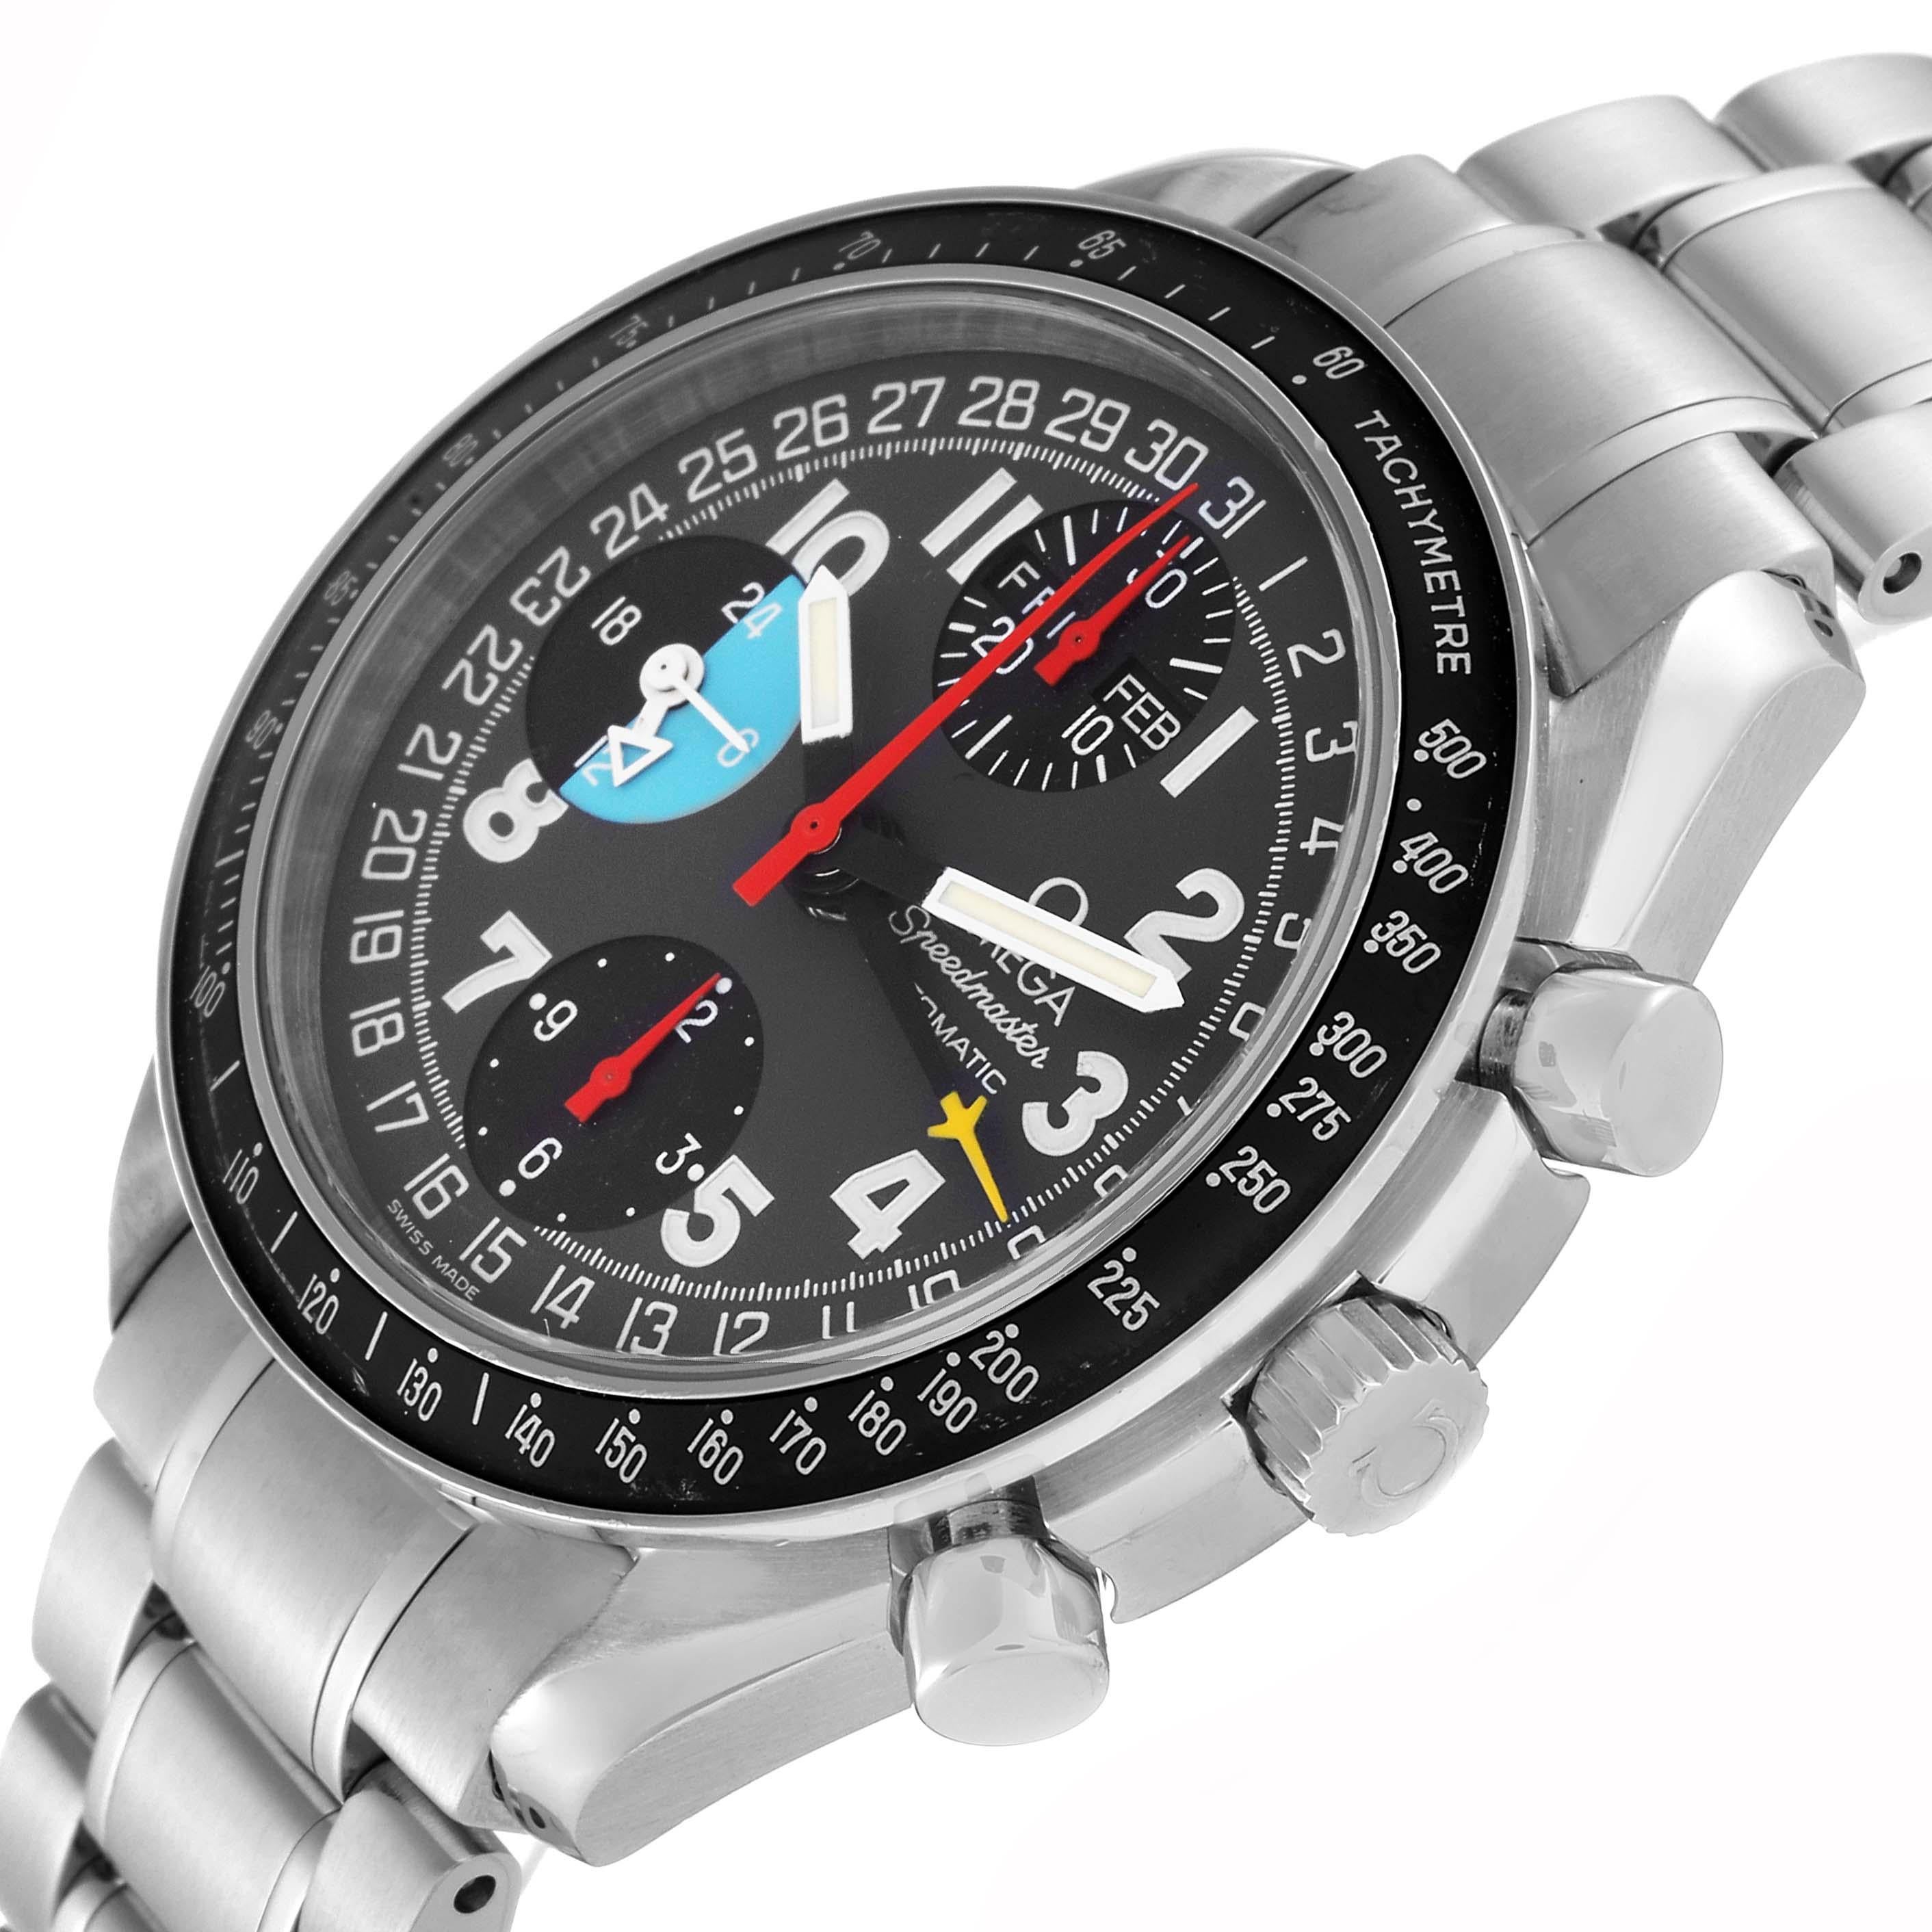 Omega Speedmaster Mark 40 Triple Calendar Steel Mens Watch 3520.53.00. Automatic self-winding chronograph movement. Stainless steel case 39.0 mm in diameter. Omega logo on crown. Button at 11 o?clock to set the day of the week. Black stainless steel